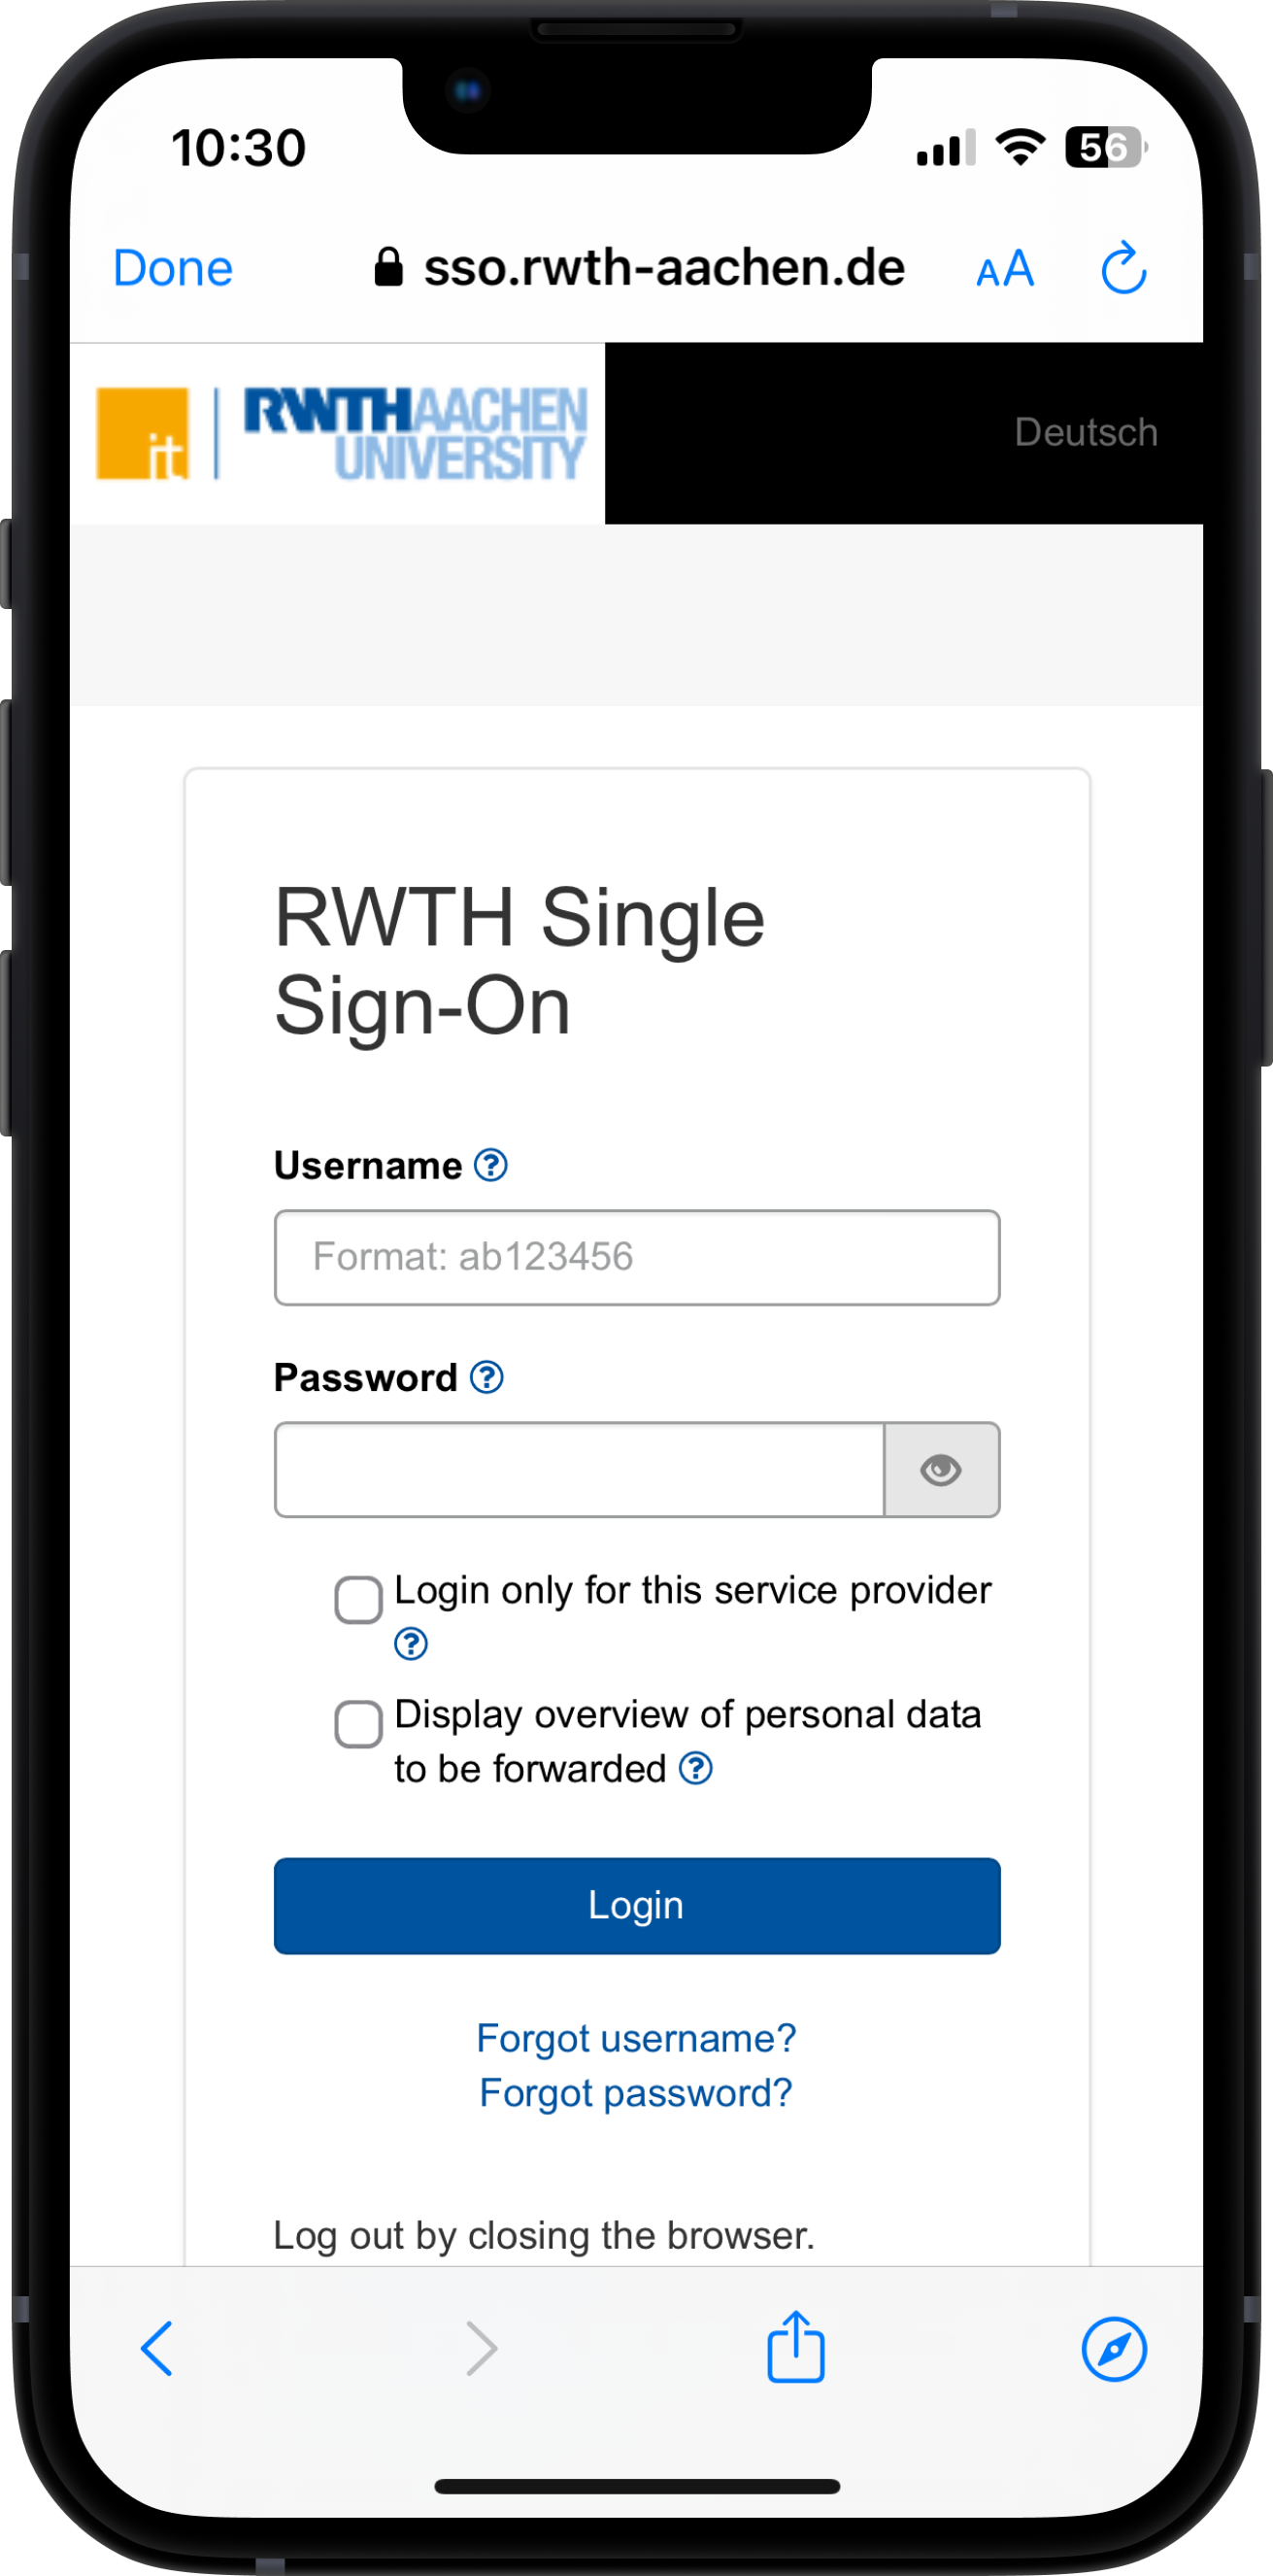 Screenshot of the login page. The page is titled "RWTH Single Sign-On". Below it, you can enter your username (in the form "ab123456") and your password.